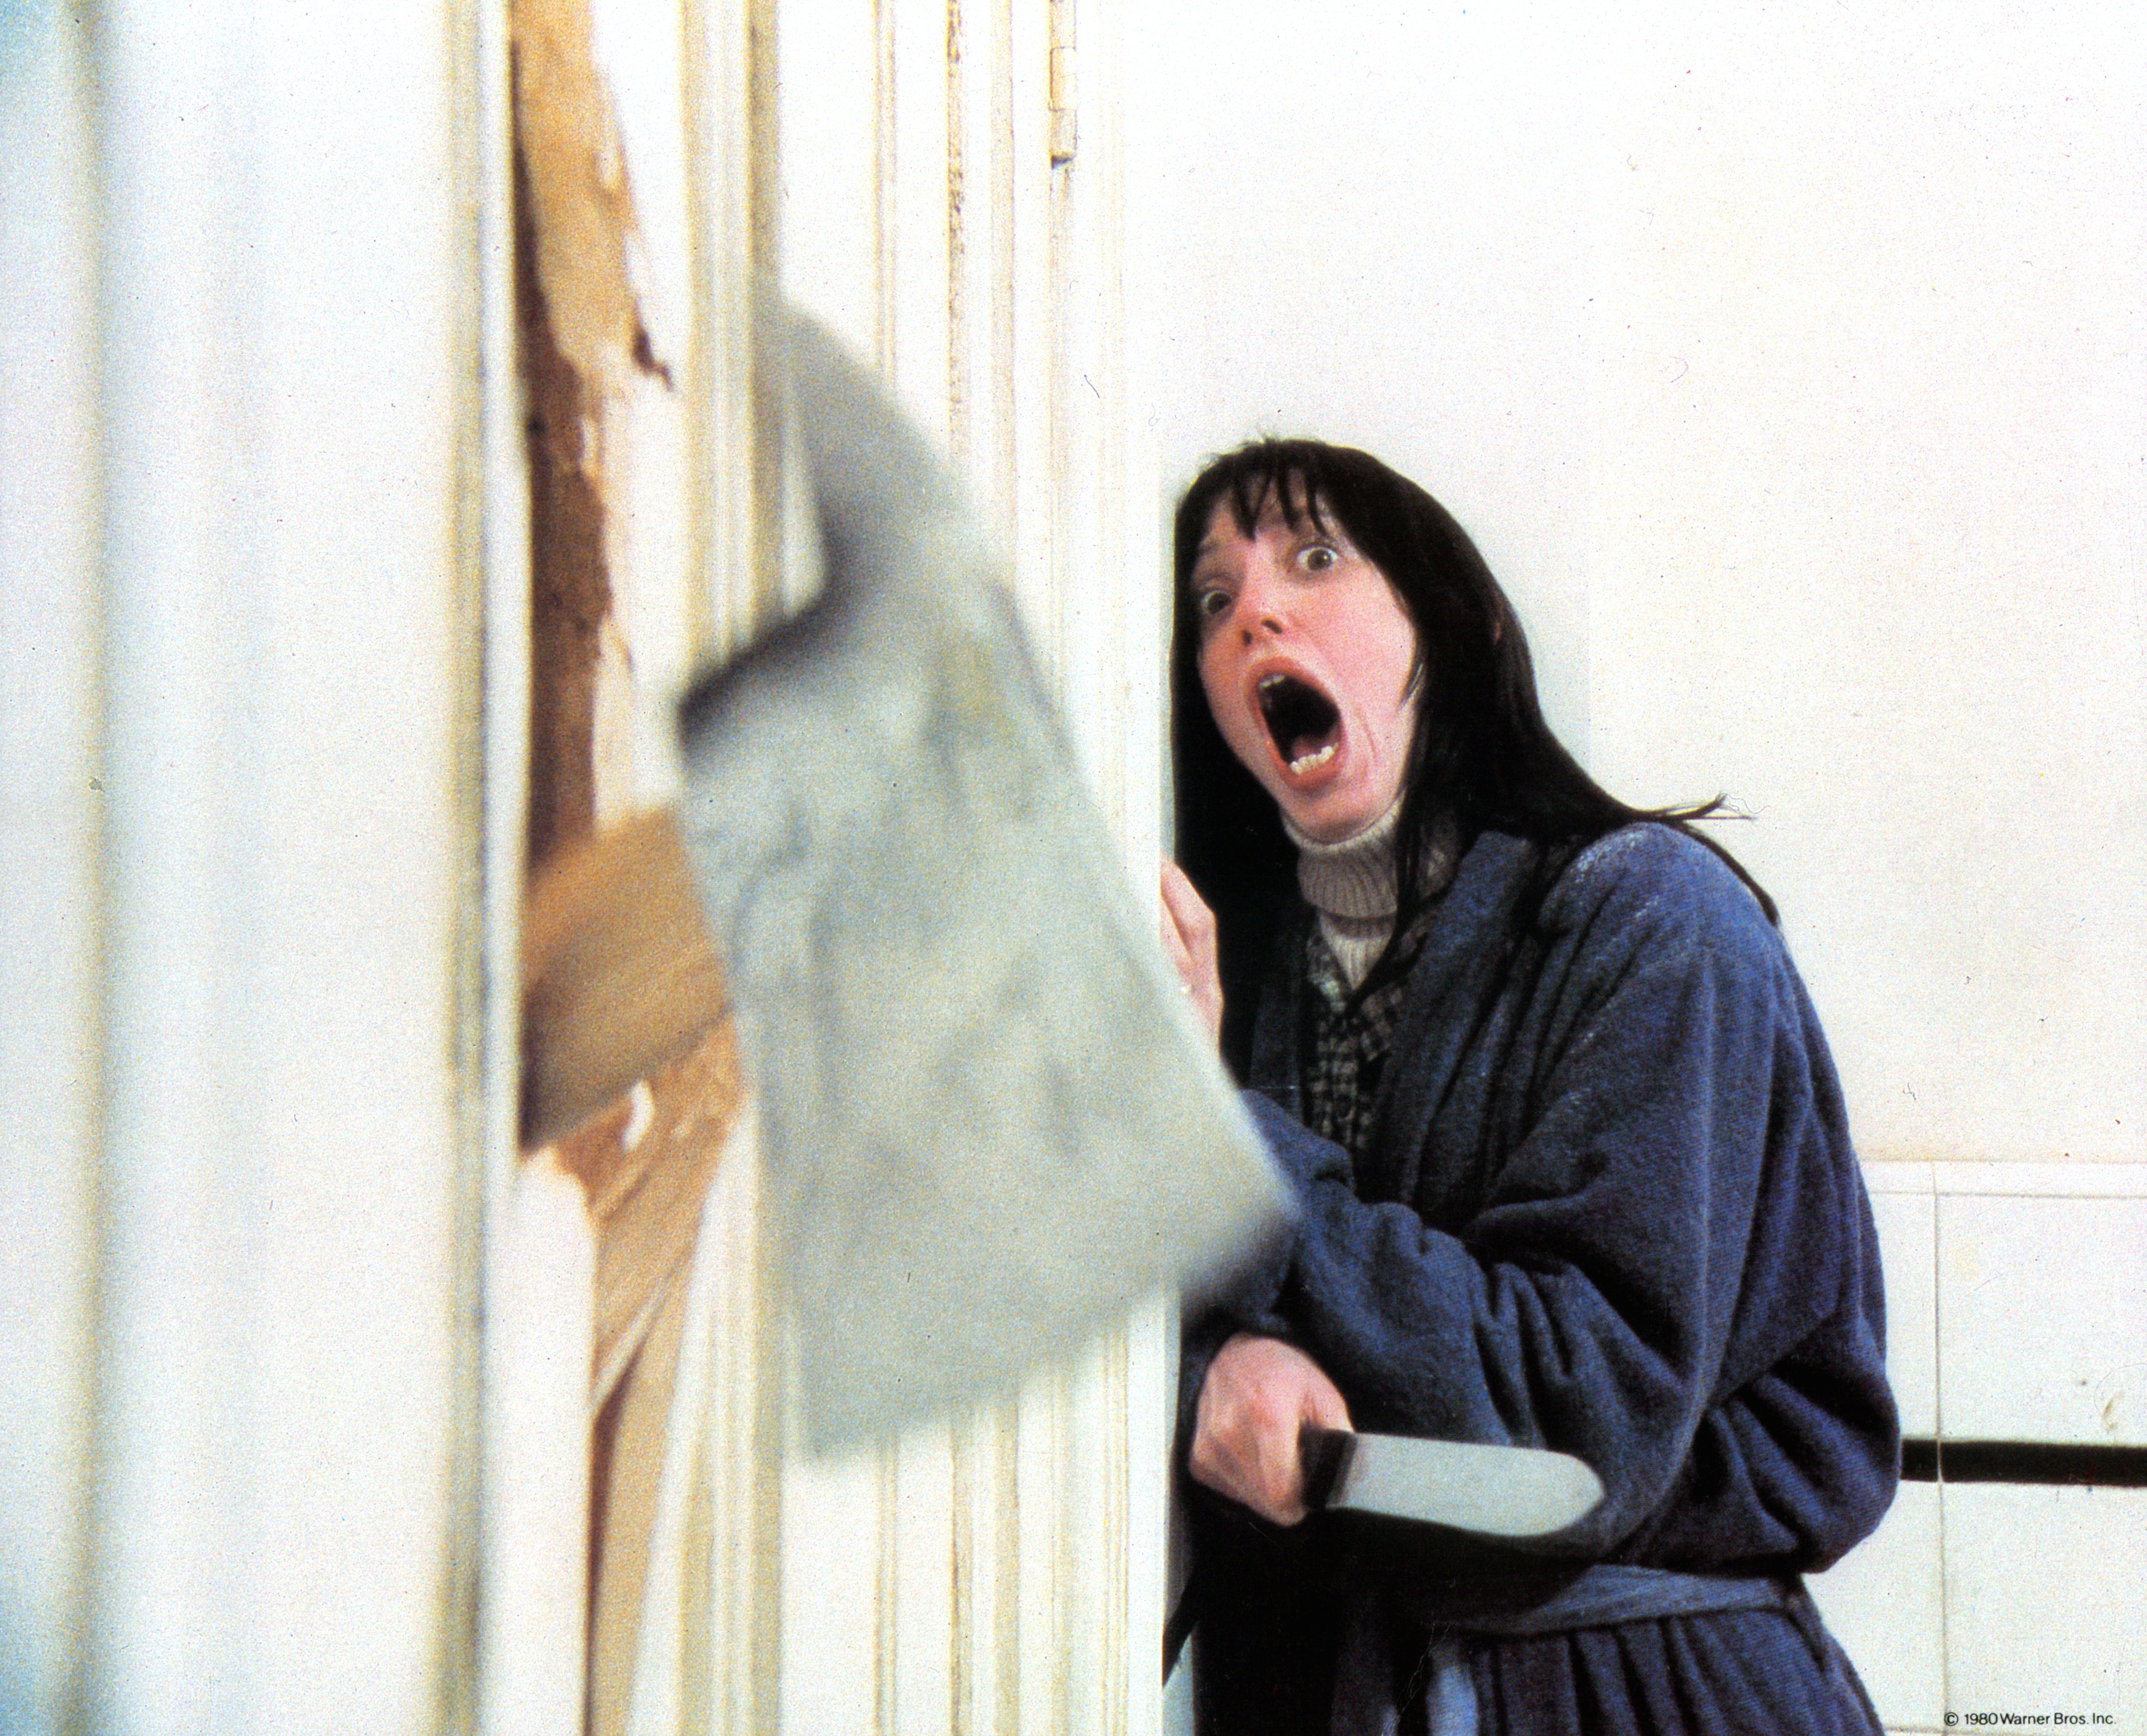 Shelley's portrayal of Wendy Torrance opposite Jack Nicholson's Jack Torrance has become an iconic Hollywood performance